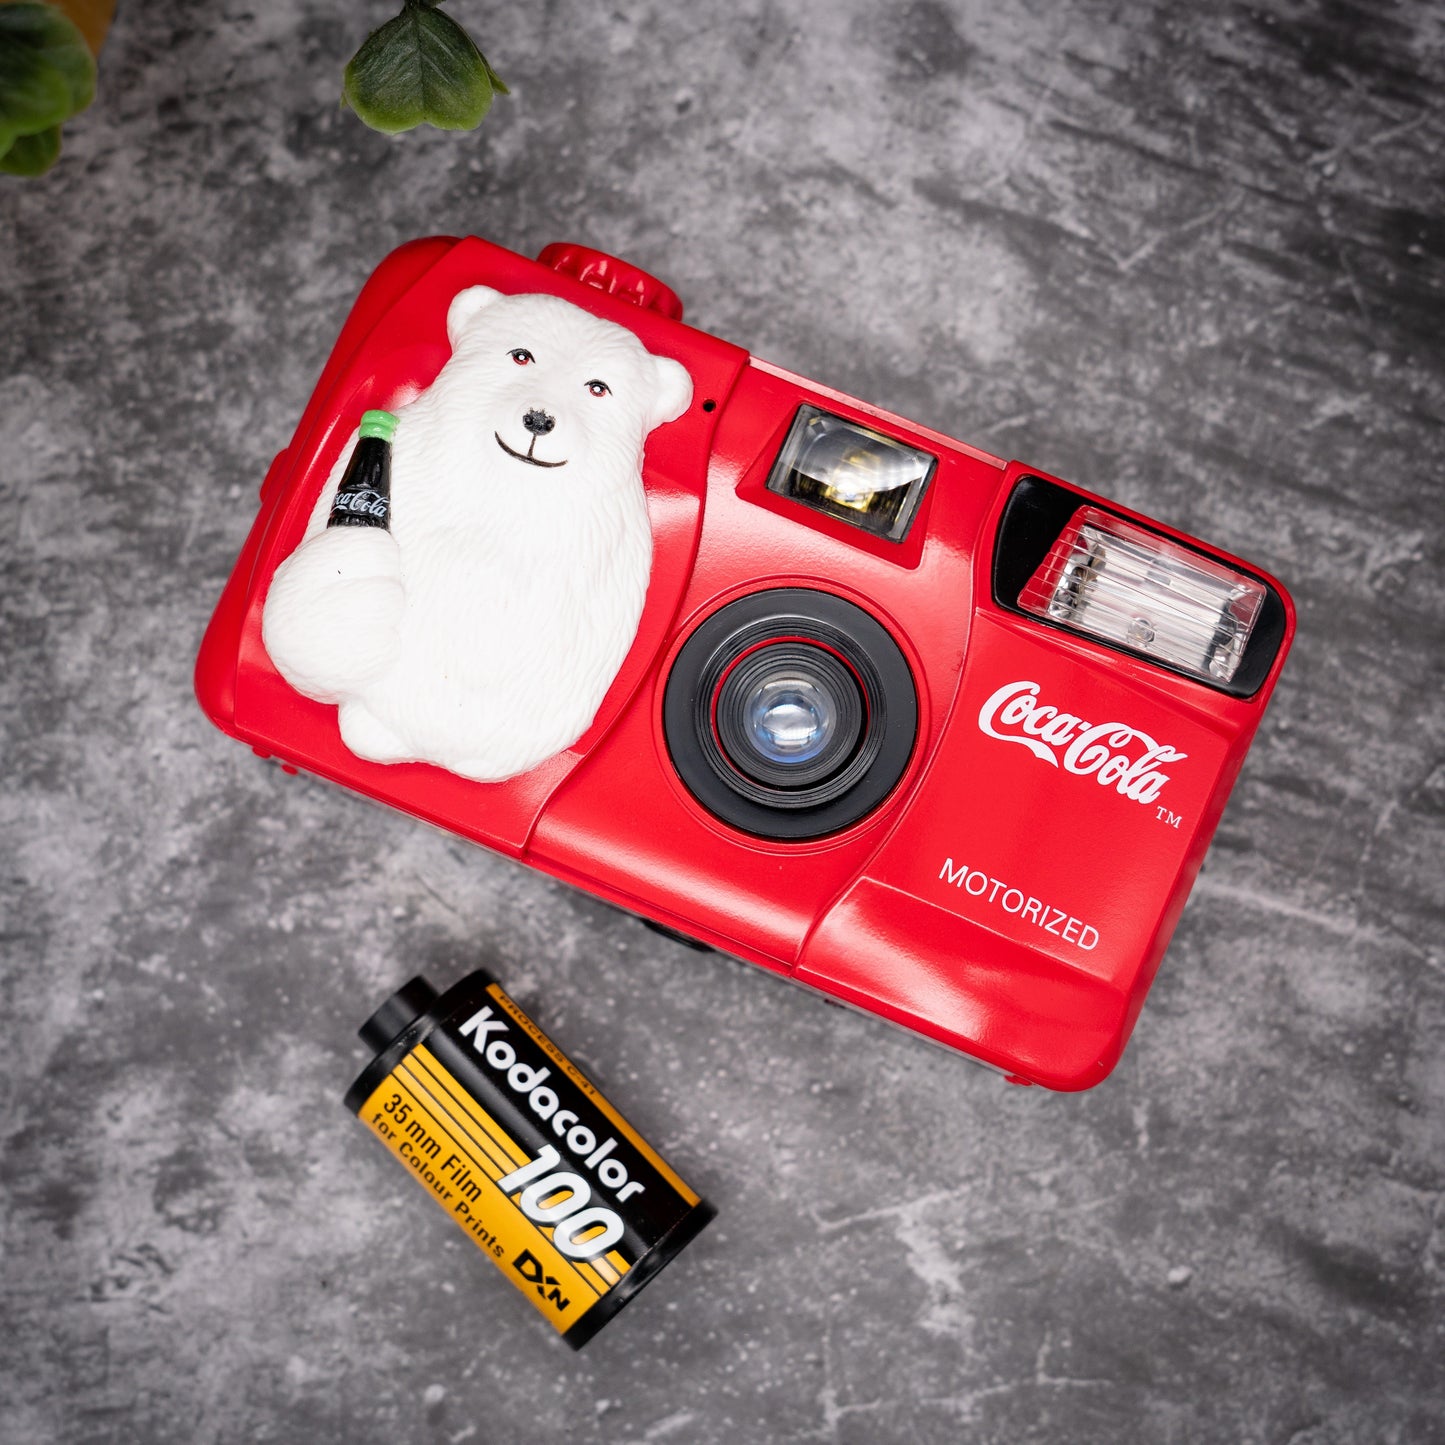 35mm Point & Shoot Camera Kit | Coke Year 2000 Collector Camera + Presentation box, Original Case, Roll Of Expired Film